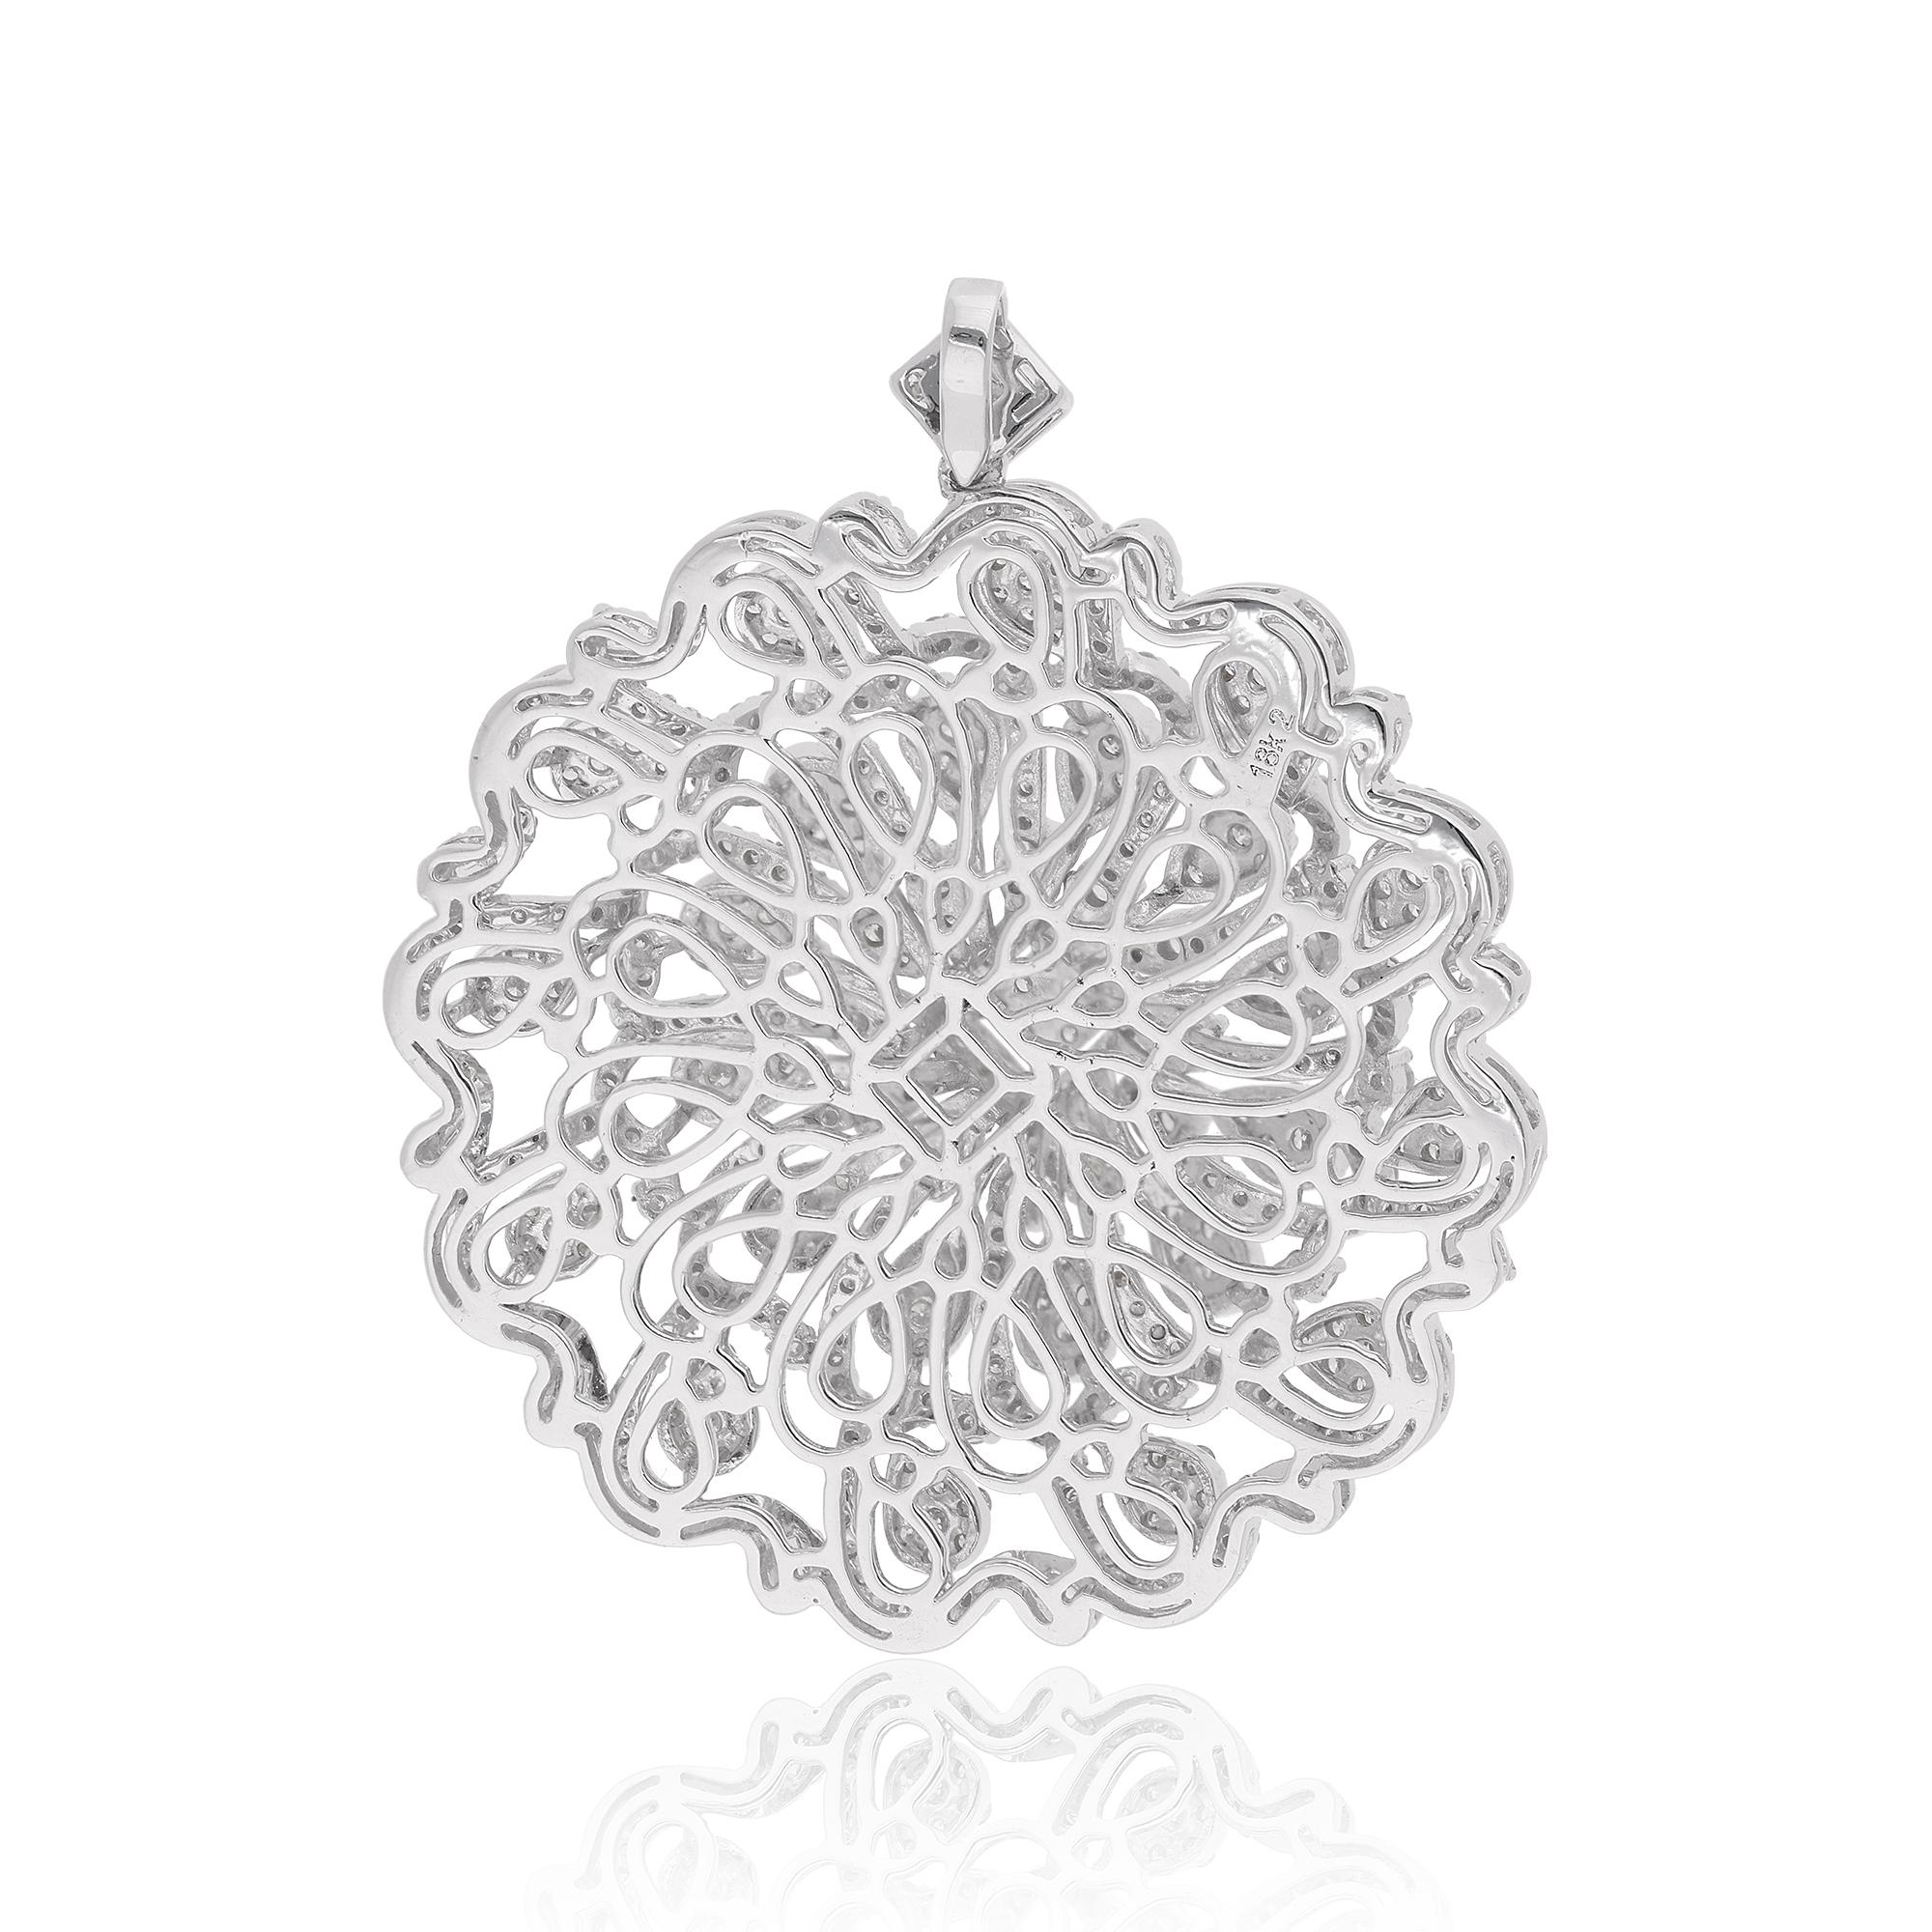 Adorn yourself with the enchanting beauty of this Natural 3.00 Carat Diamond Pave Floral Pendant, meticulously crafted in exquisite 14 Karat White Gold. This stunning piece of fine jewelry is a radiant celebration of nature's elegance and grace,